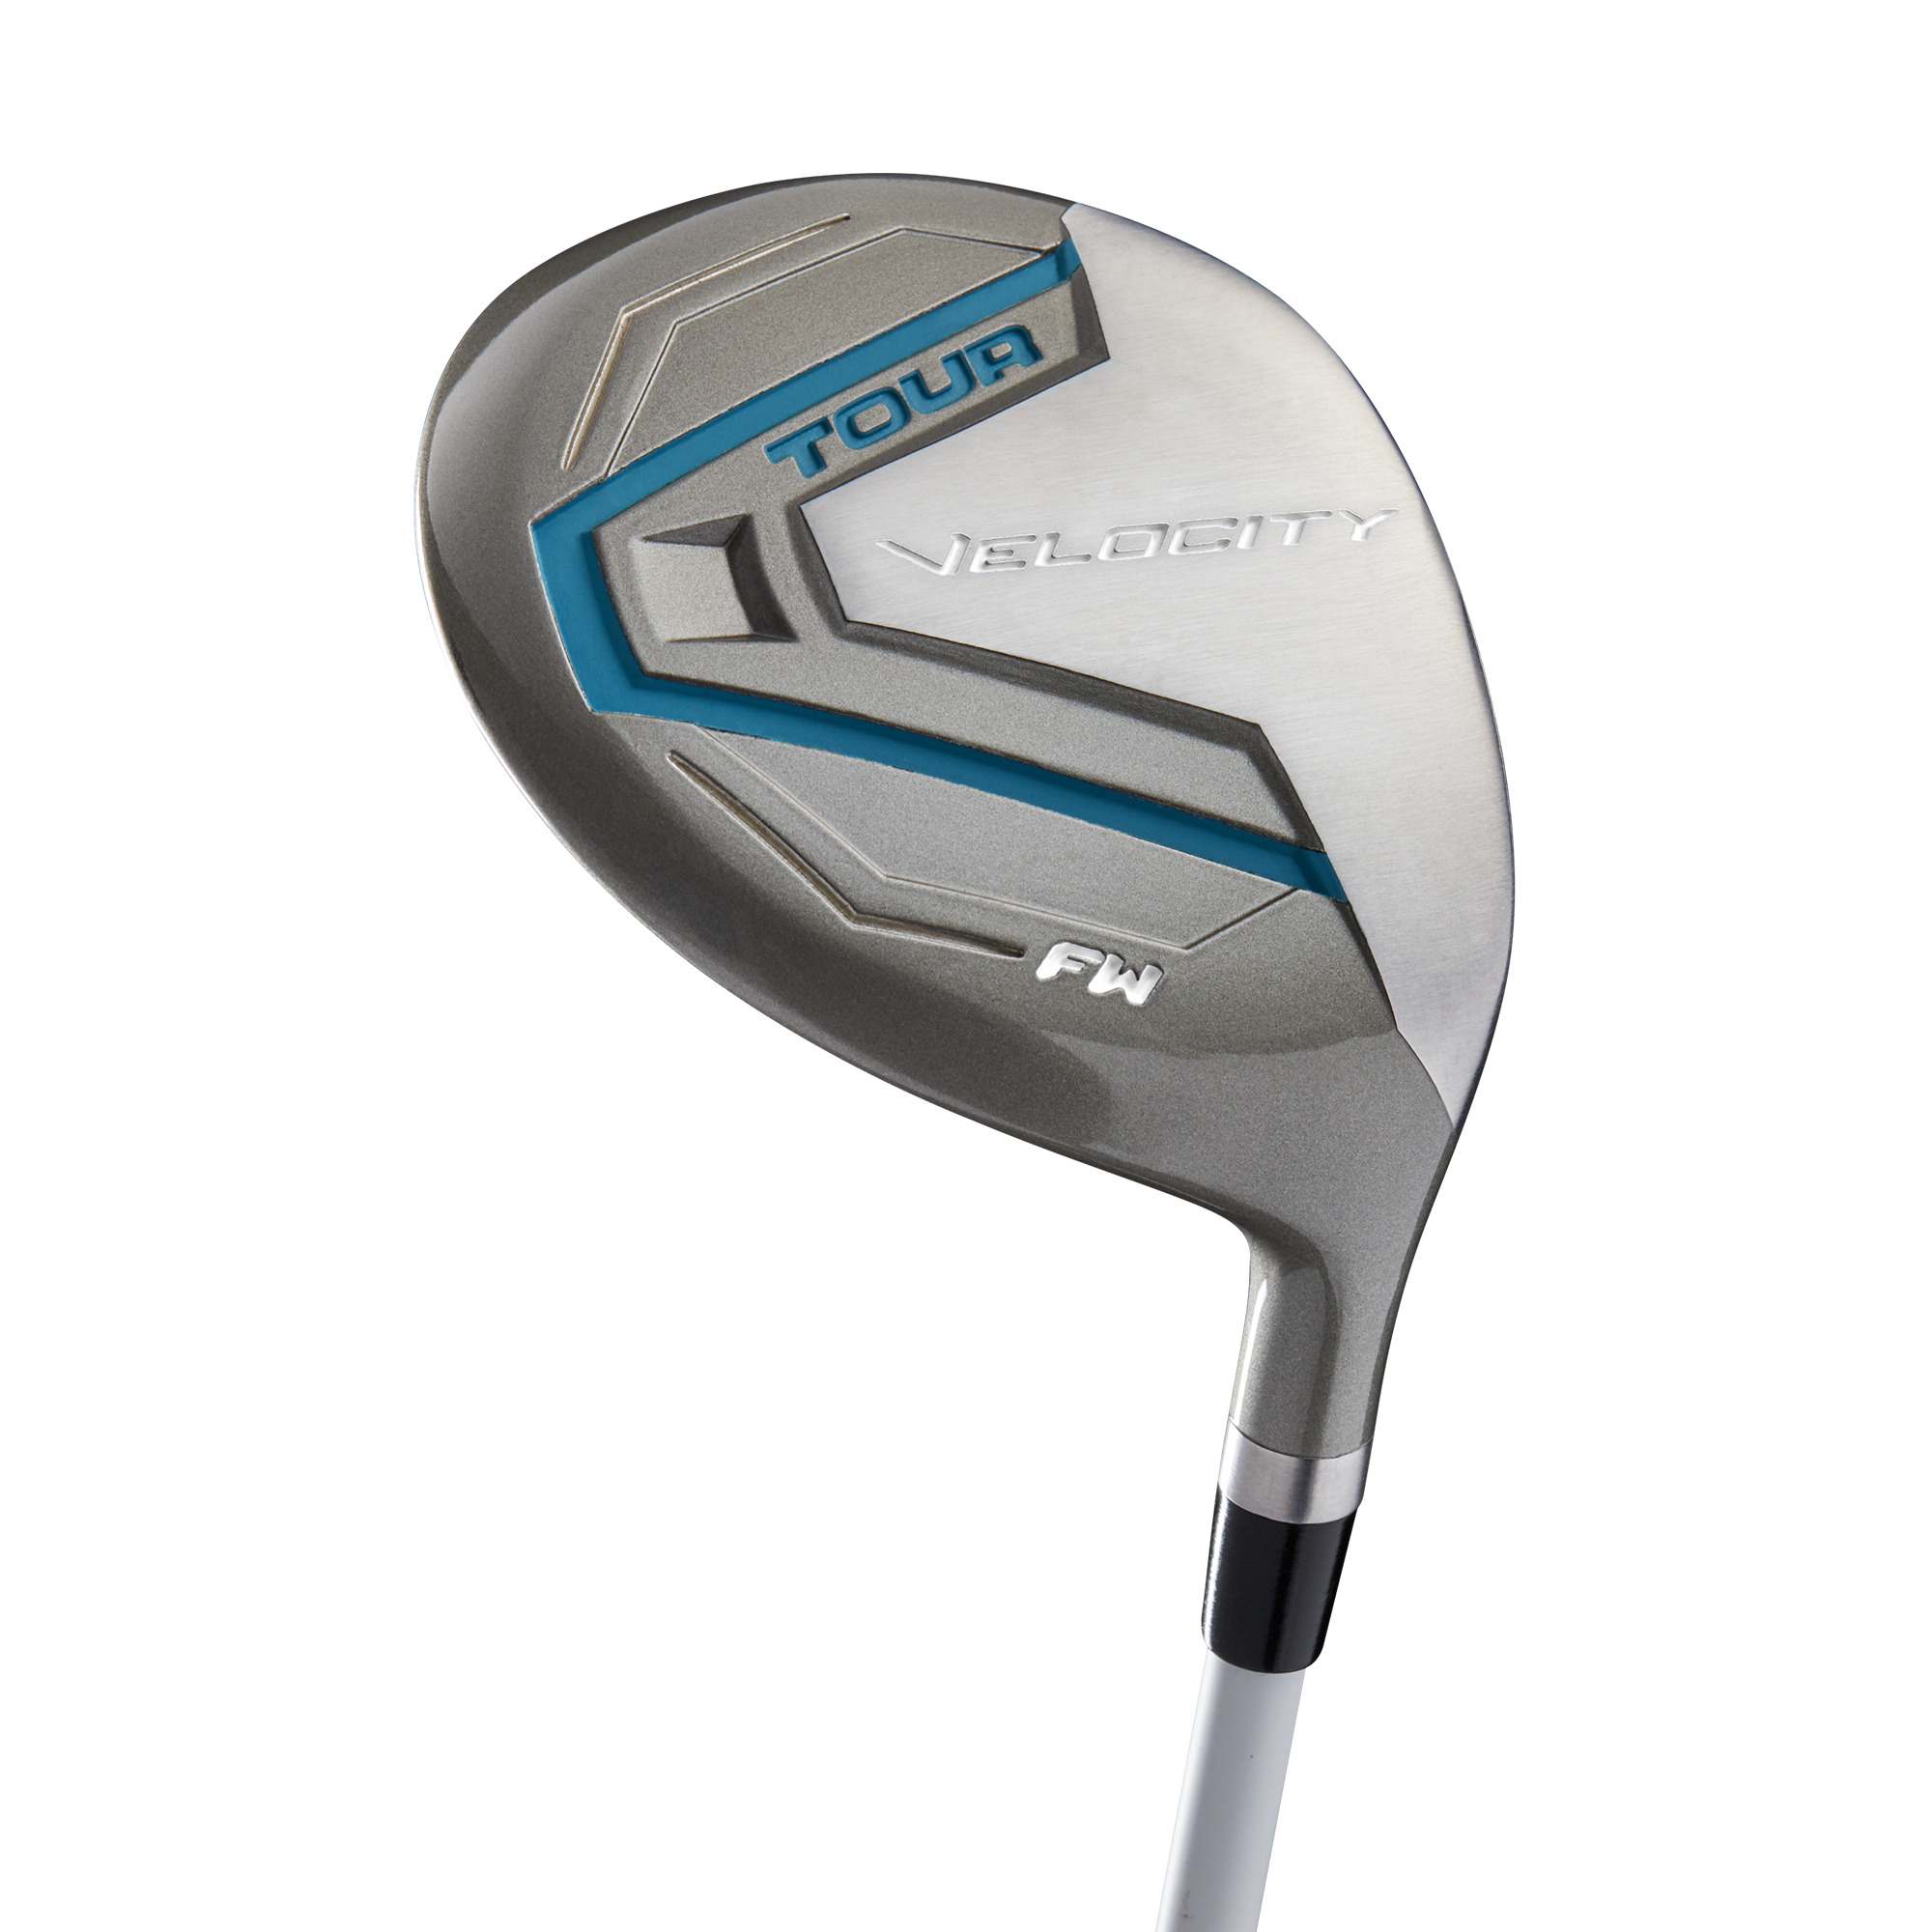 Wilson Tour Velocity Women's Golf Club Set, Right Handed - image 4 of 7